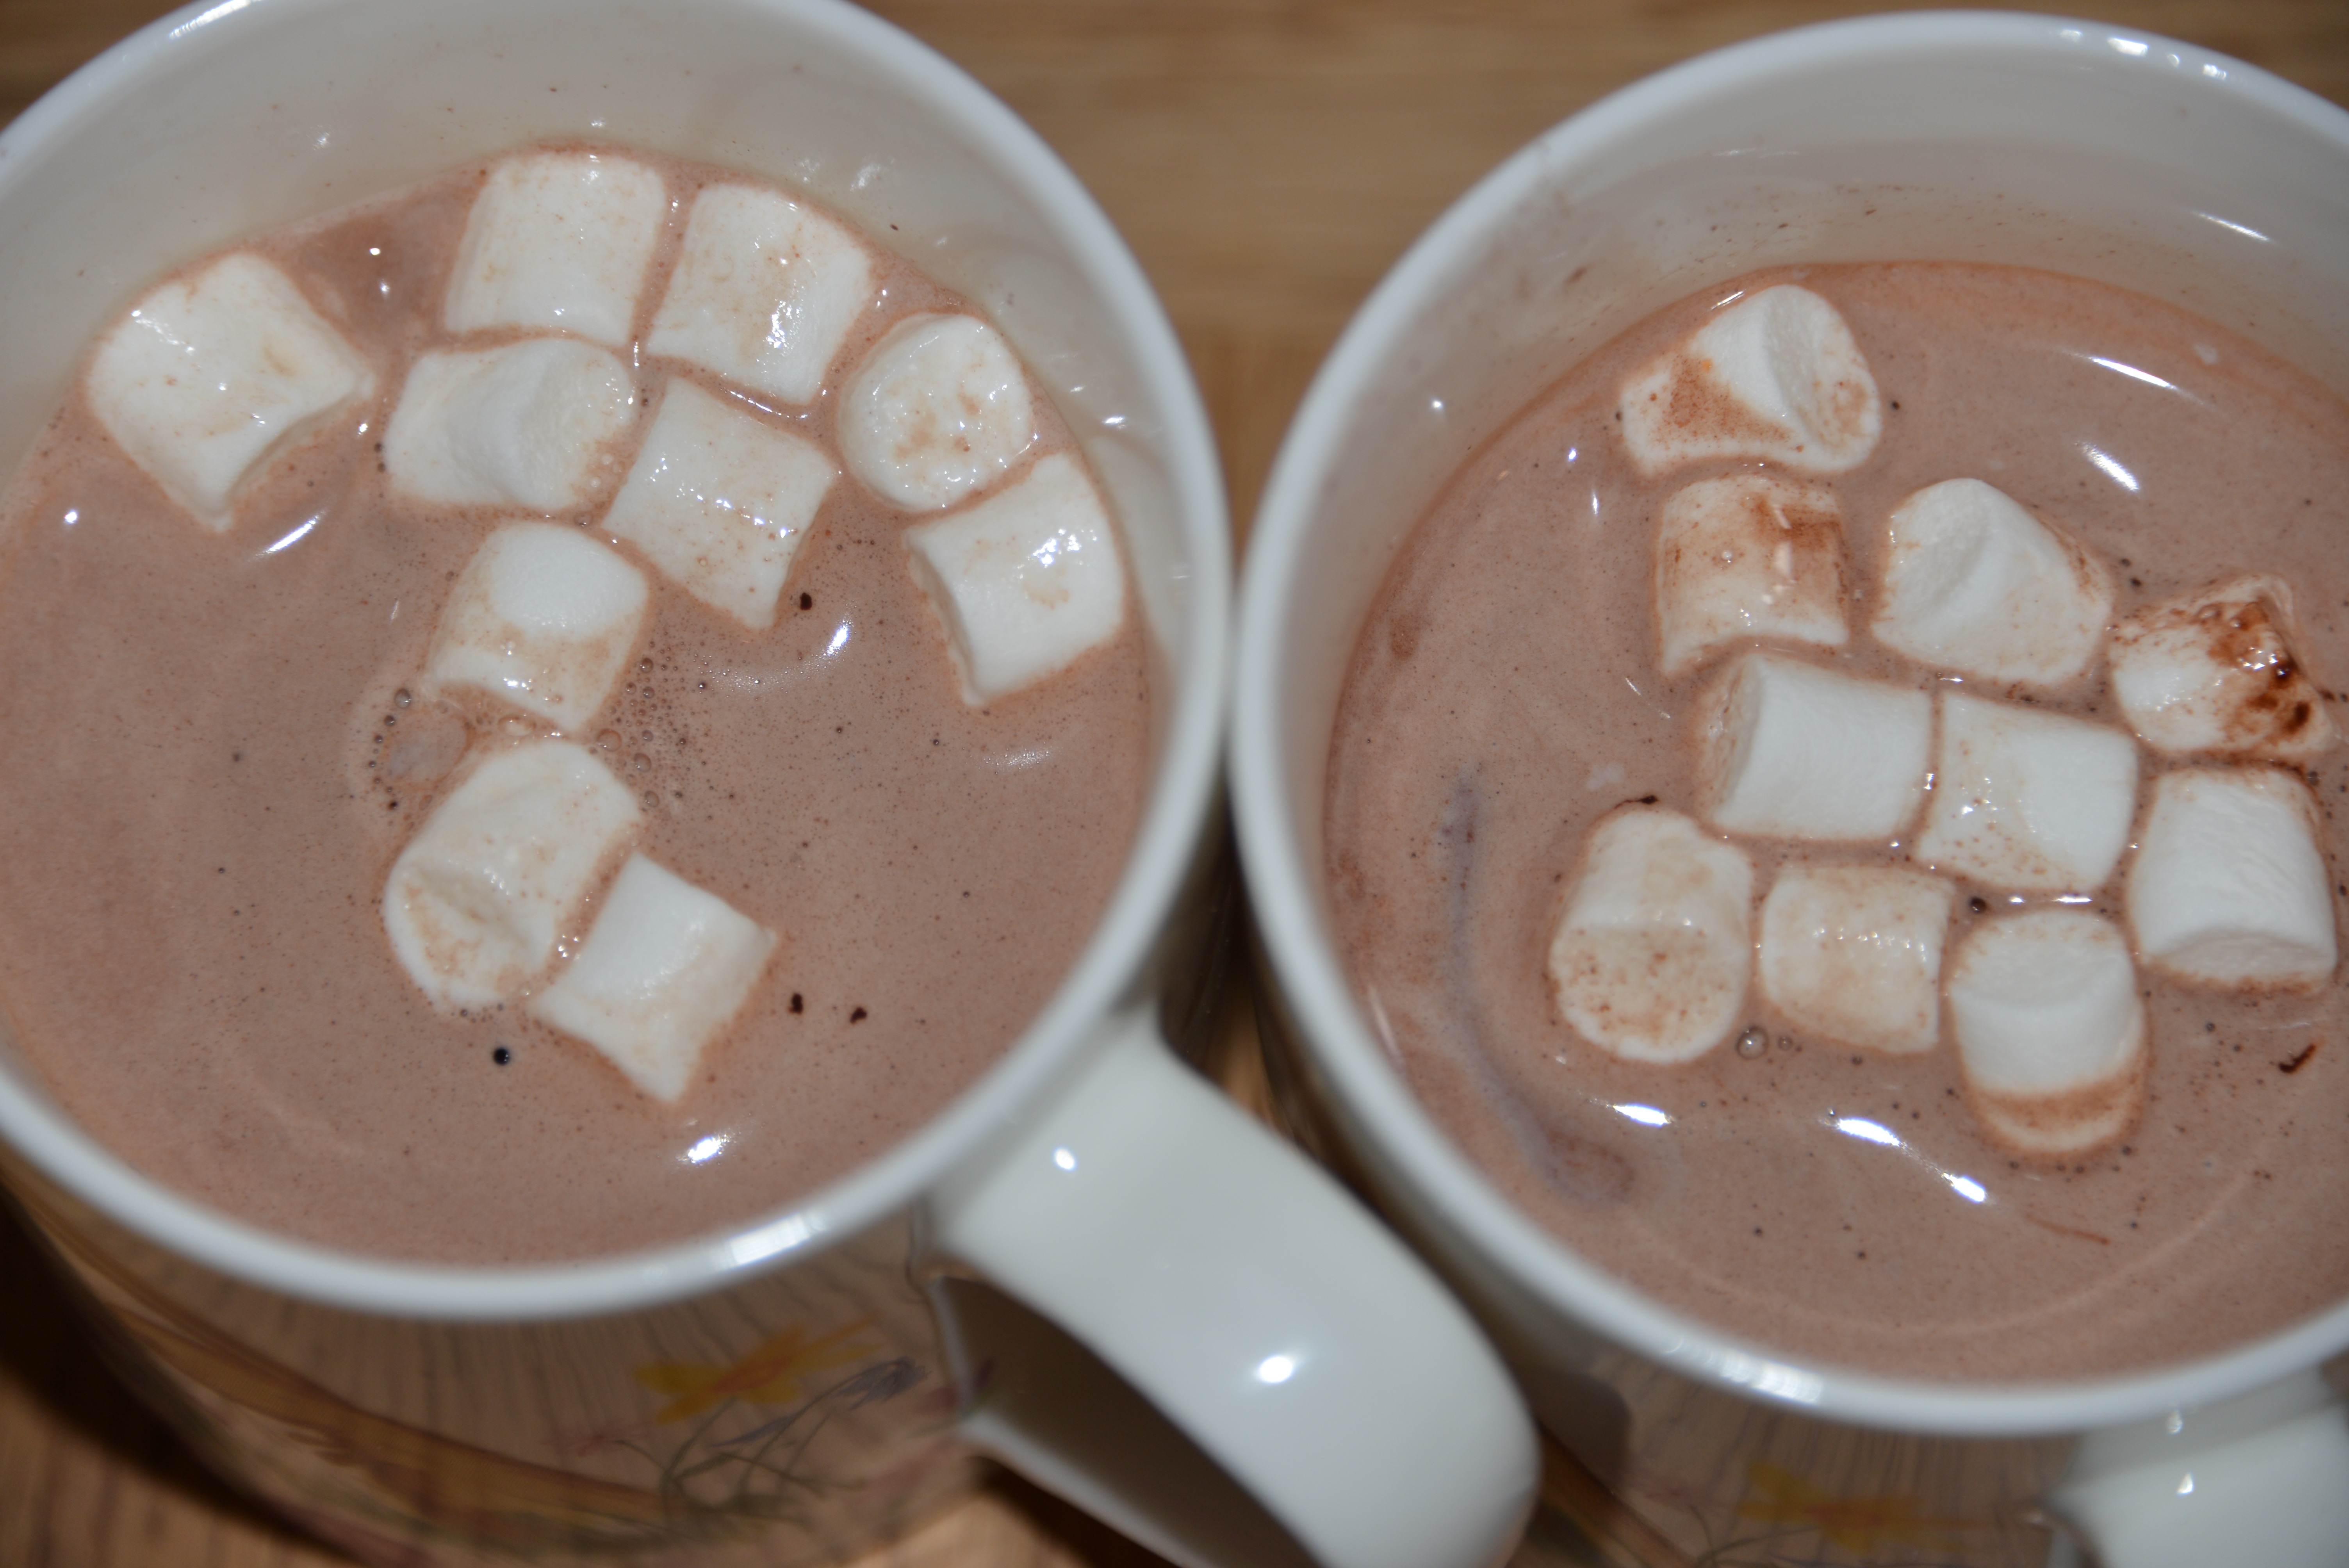 Hot chocolate science experiment , image shows small marshmallows in a mug of hot chocolate.